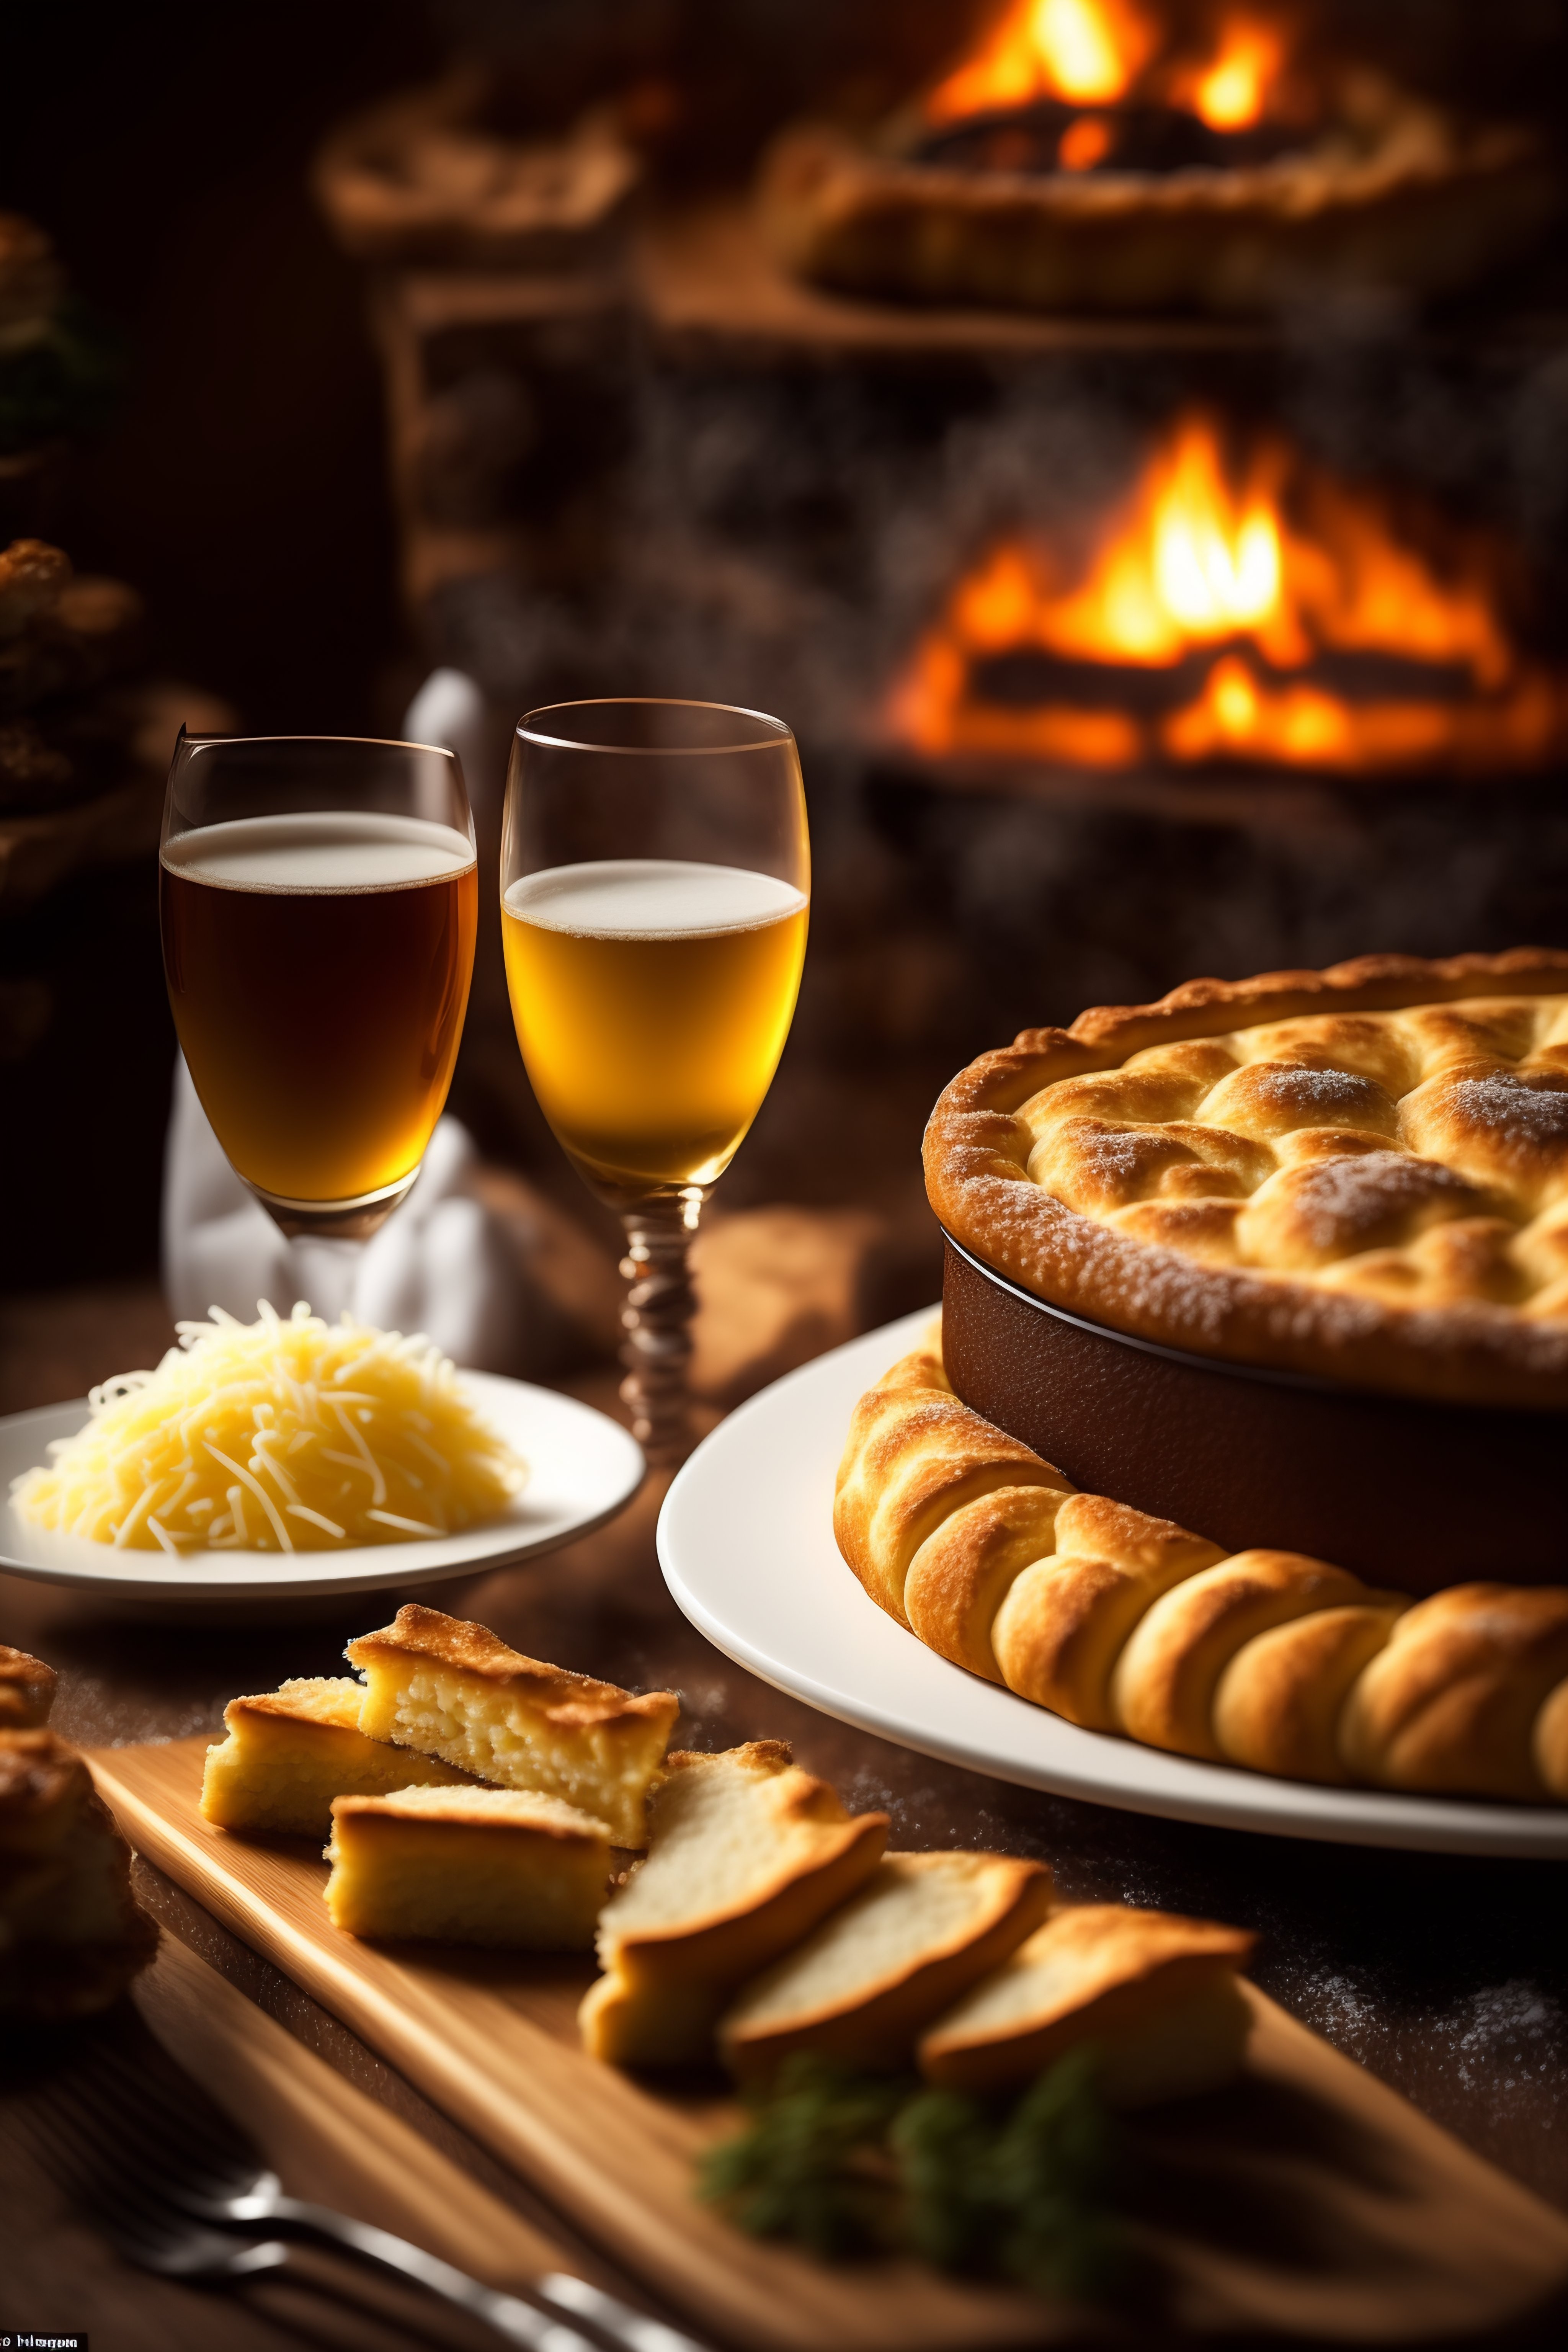 10 Classic Alpine Winter Recipes from Ski Resorts in France, Switzerland, Austria, and the Bavarian Alps